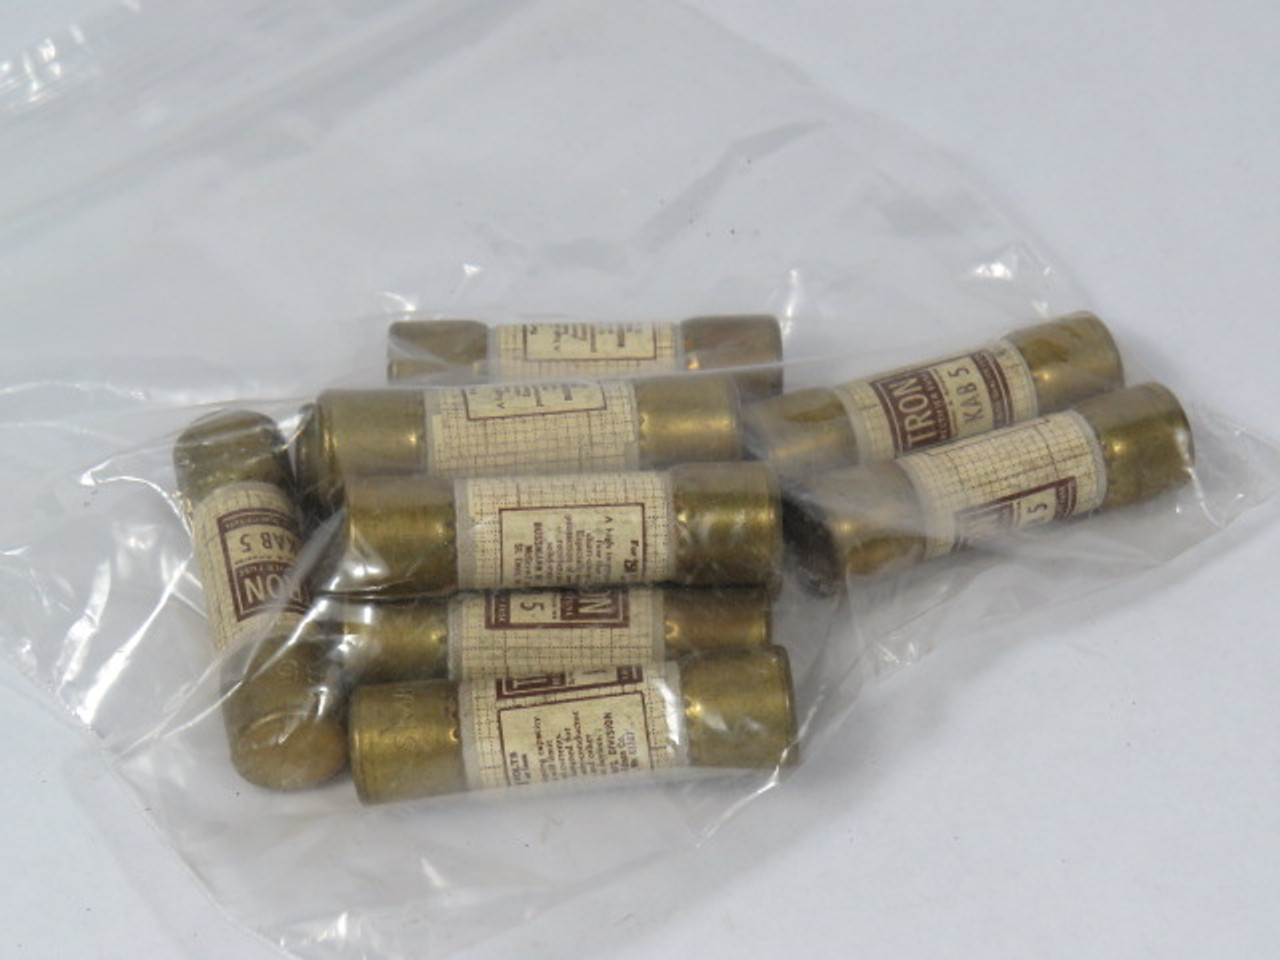 Tron KAB-5 Rectifier Fuse 5A 250V Lot of 10 USED